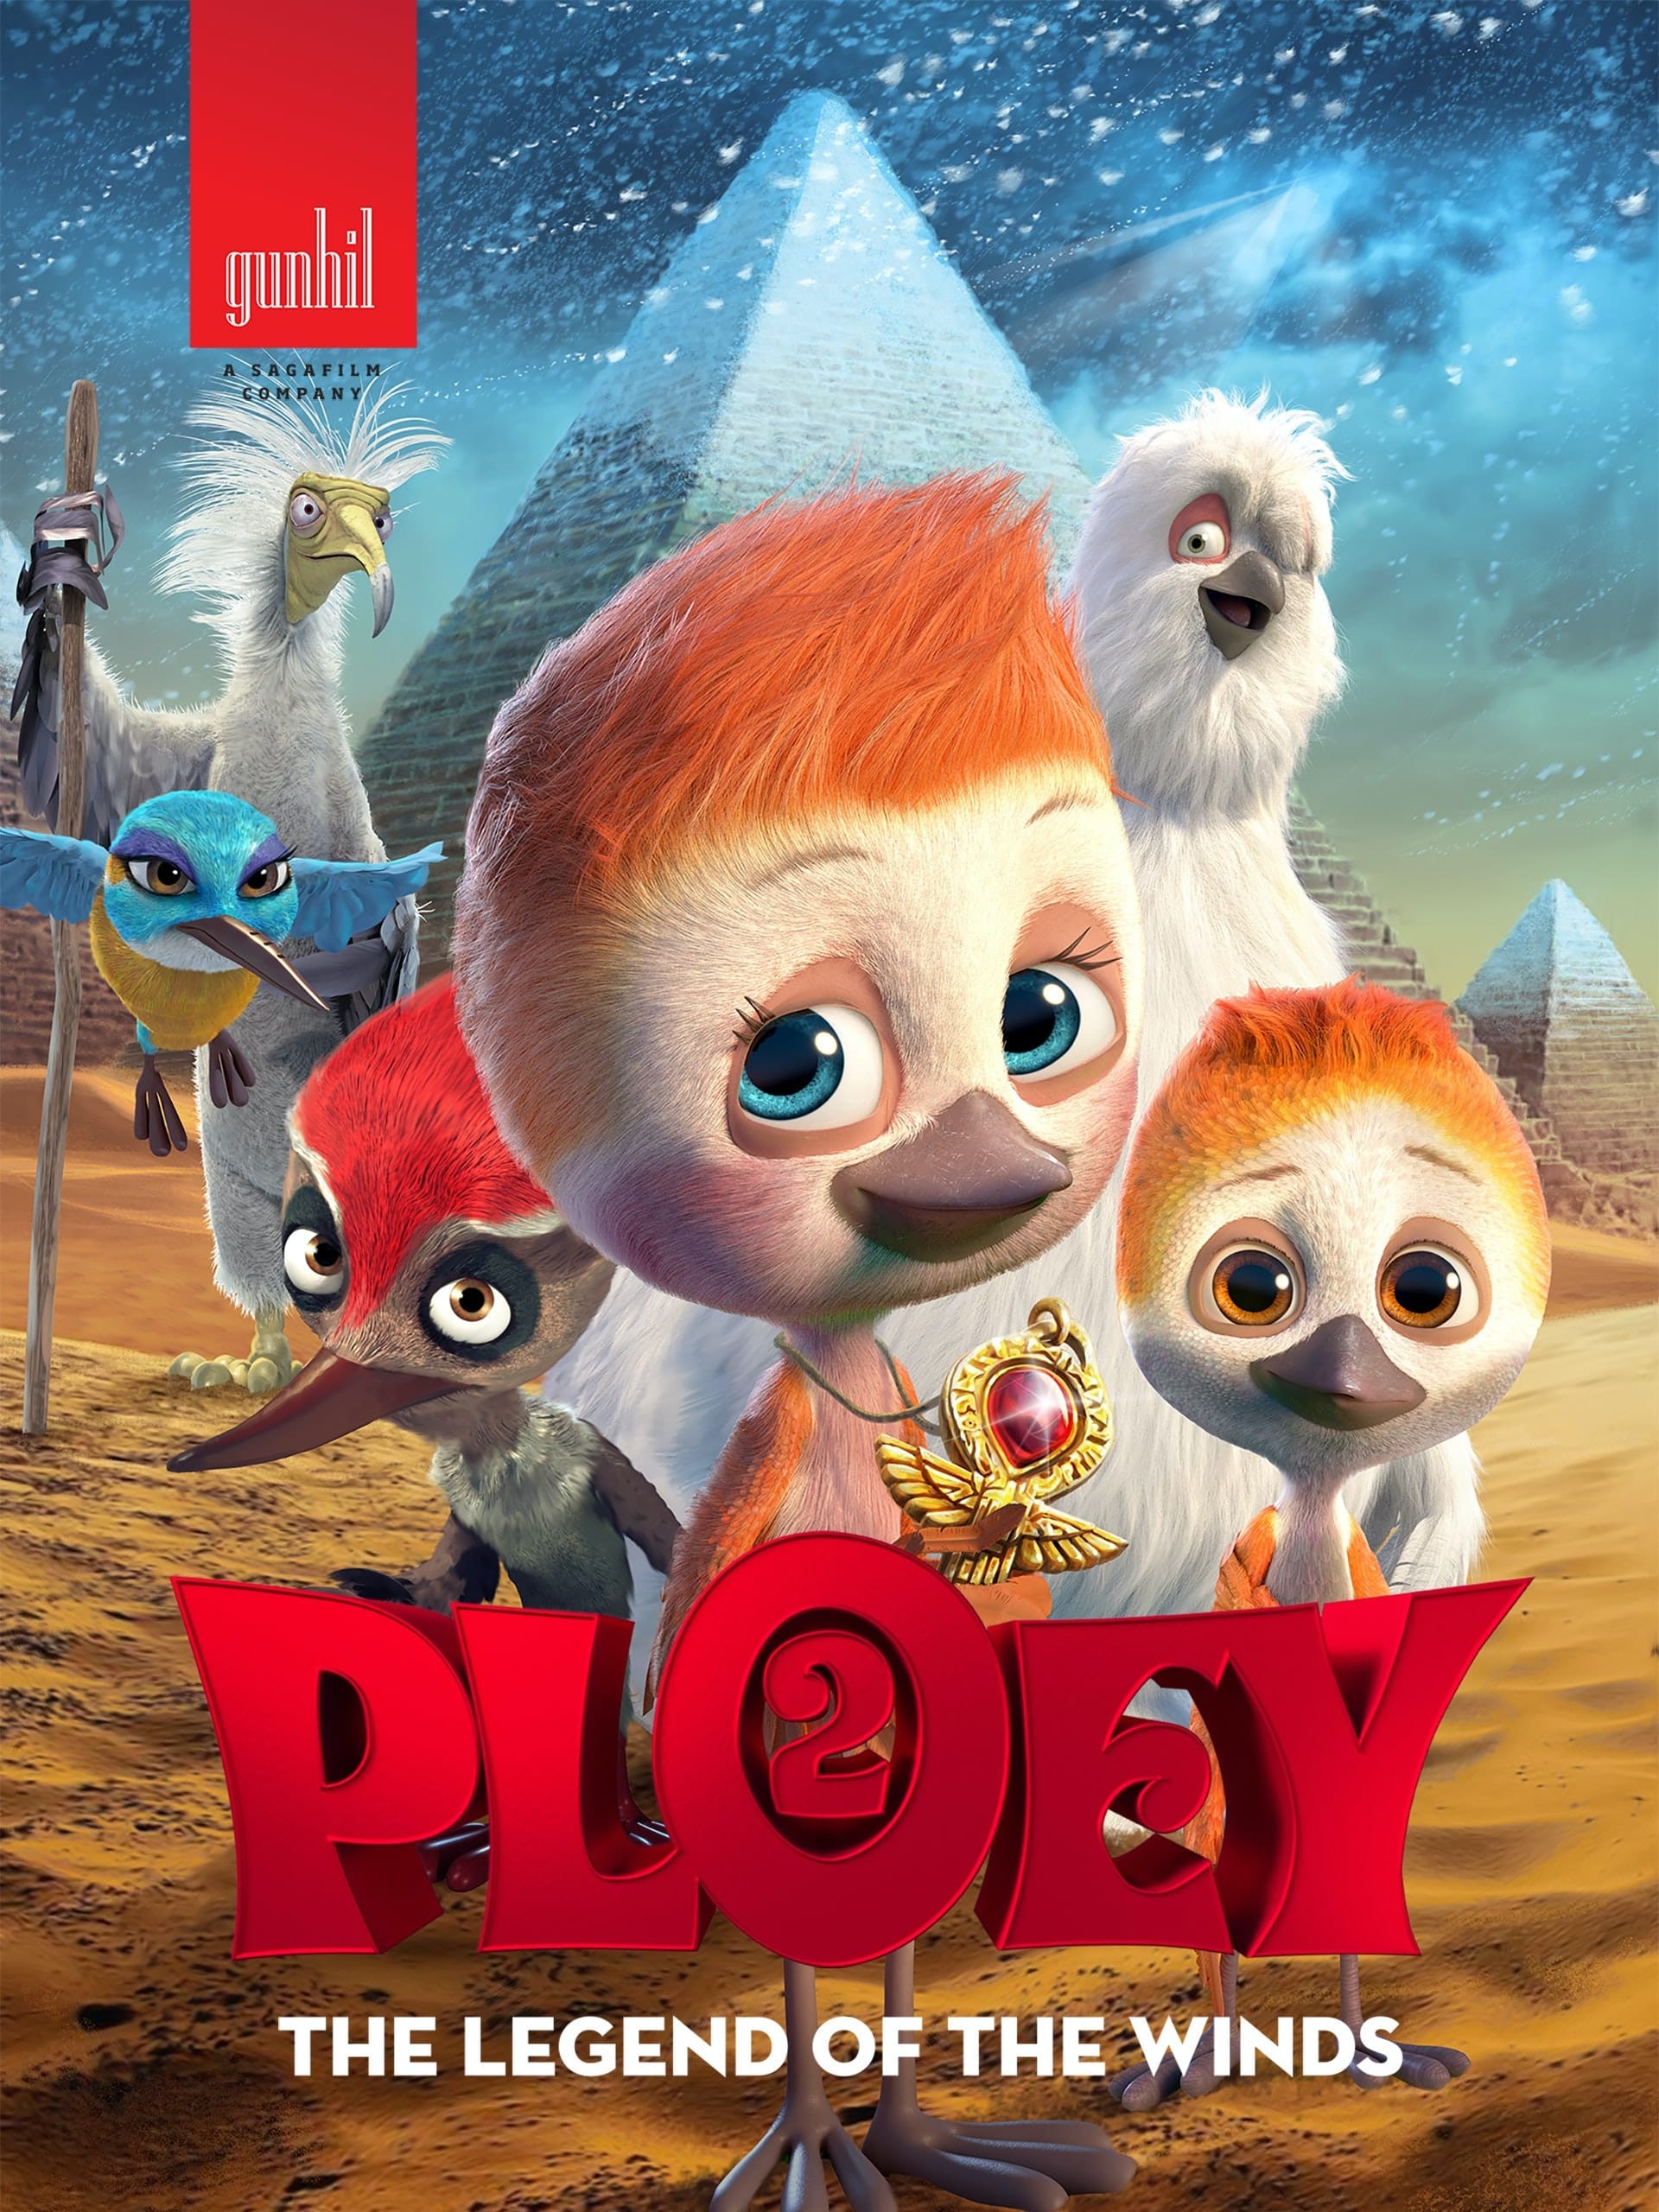 Ploey 2 – The Legend of the Winds